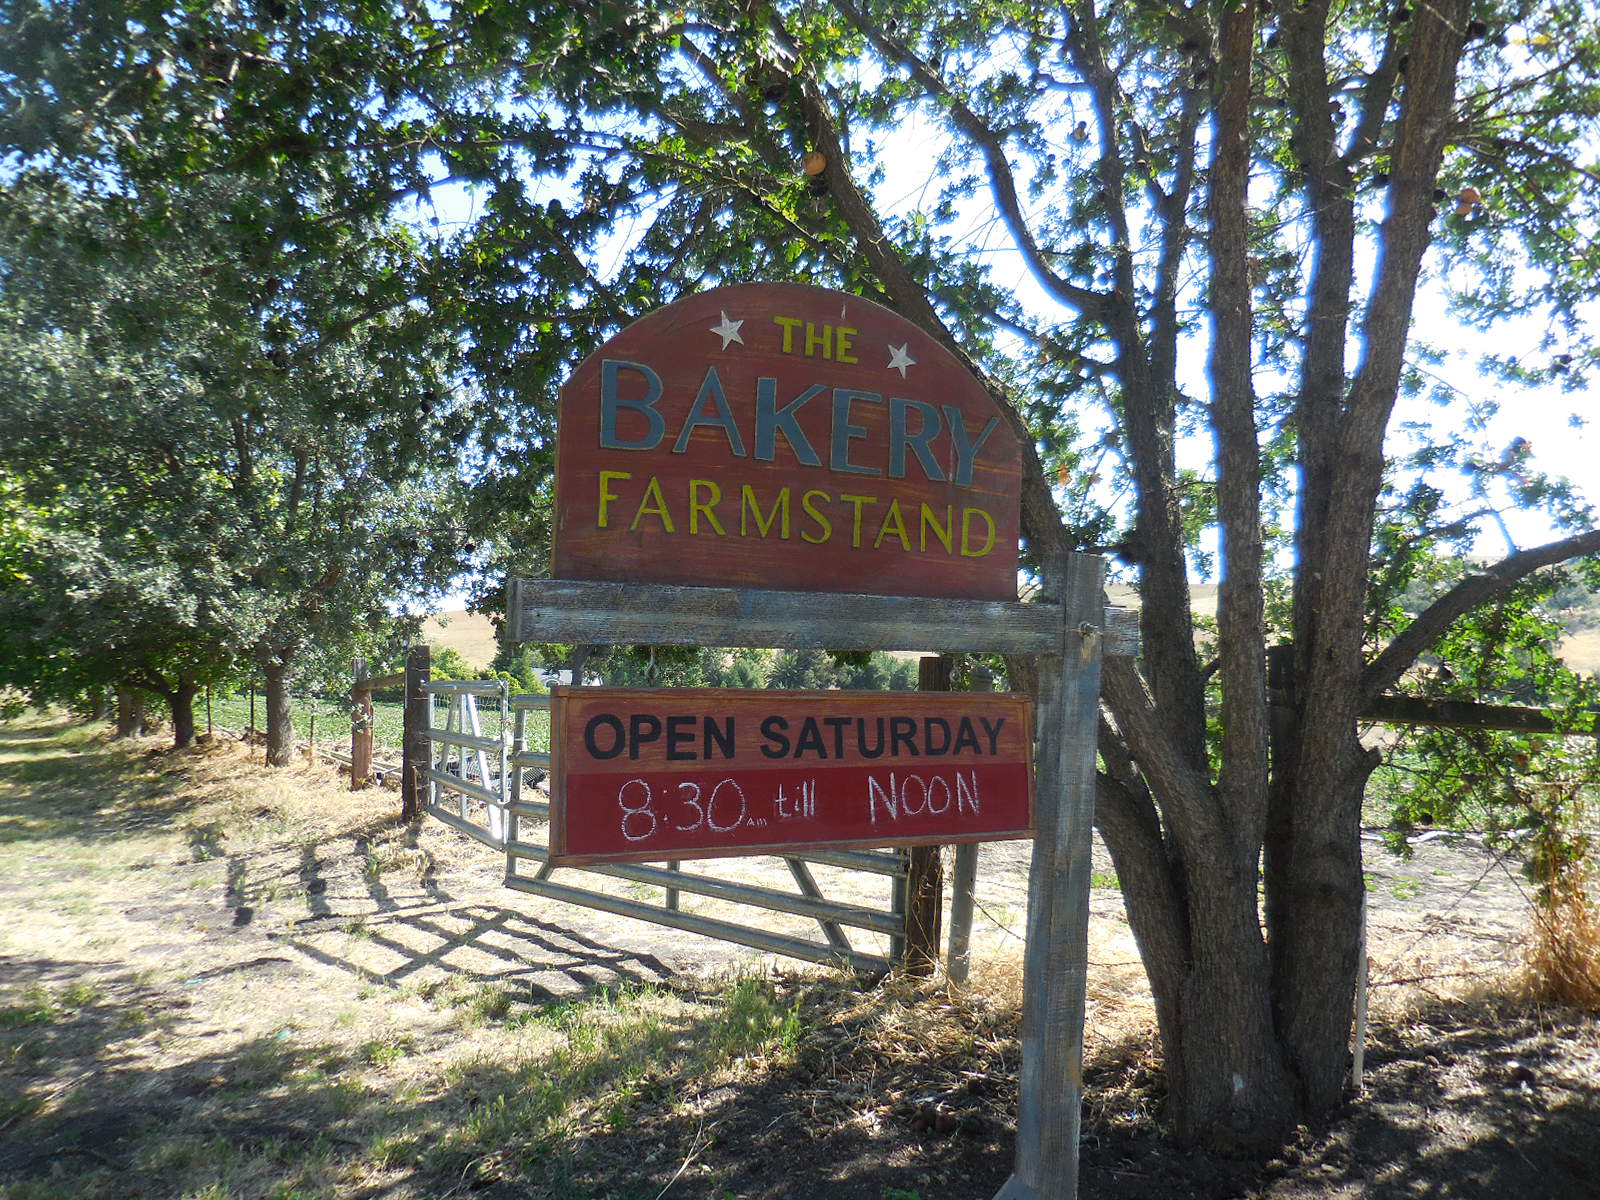 The Bakery Farmstand offers sweet treats